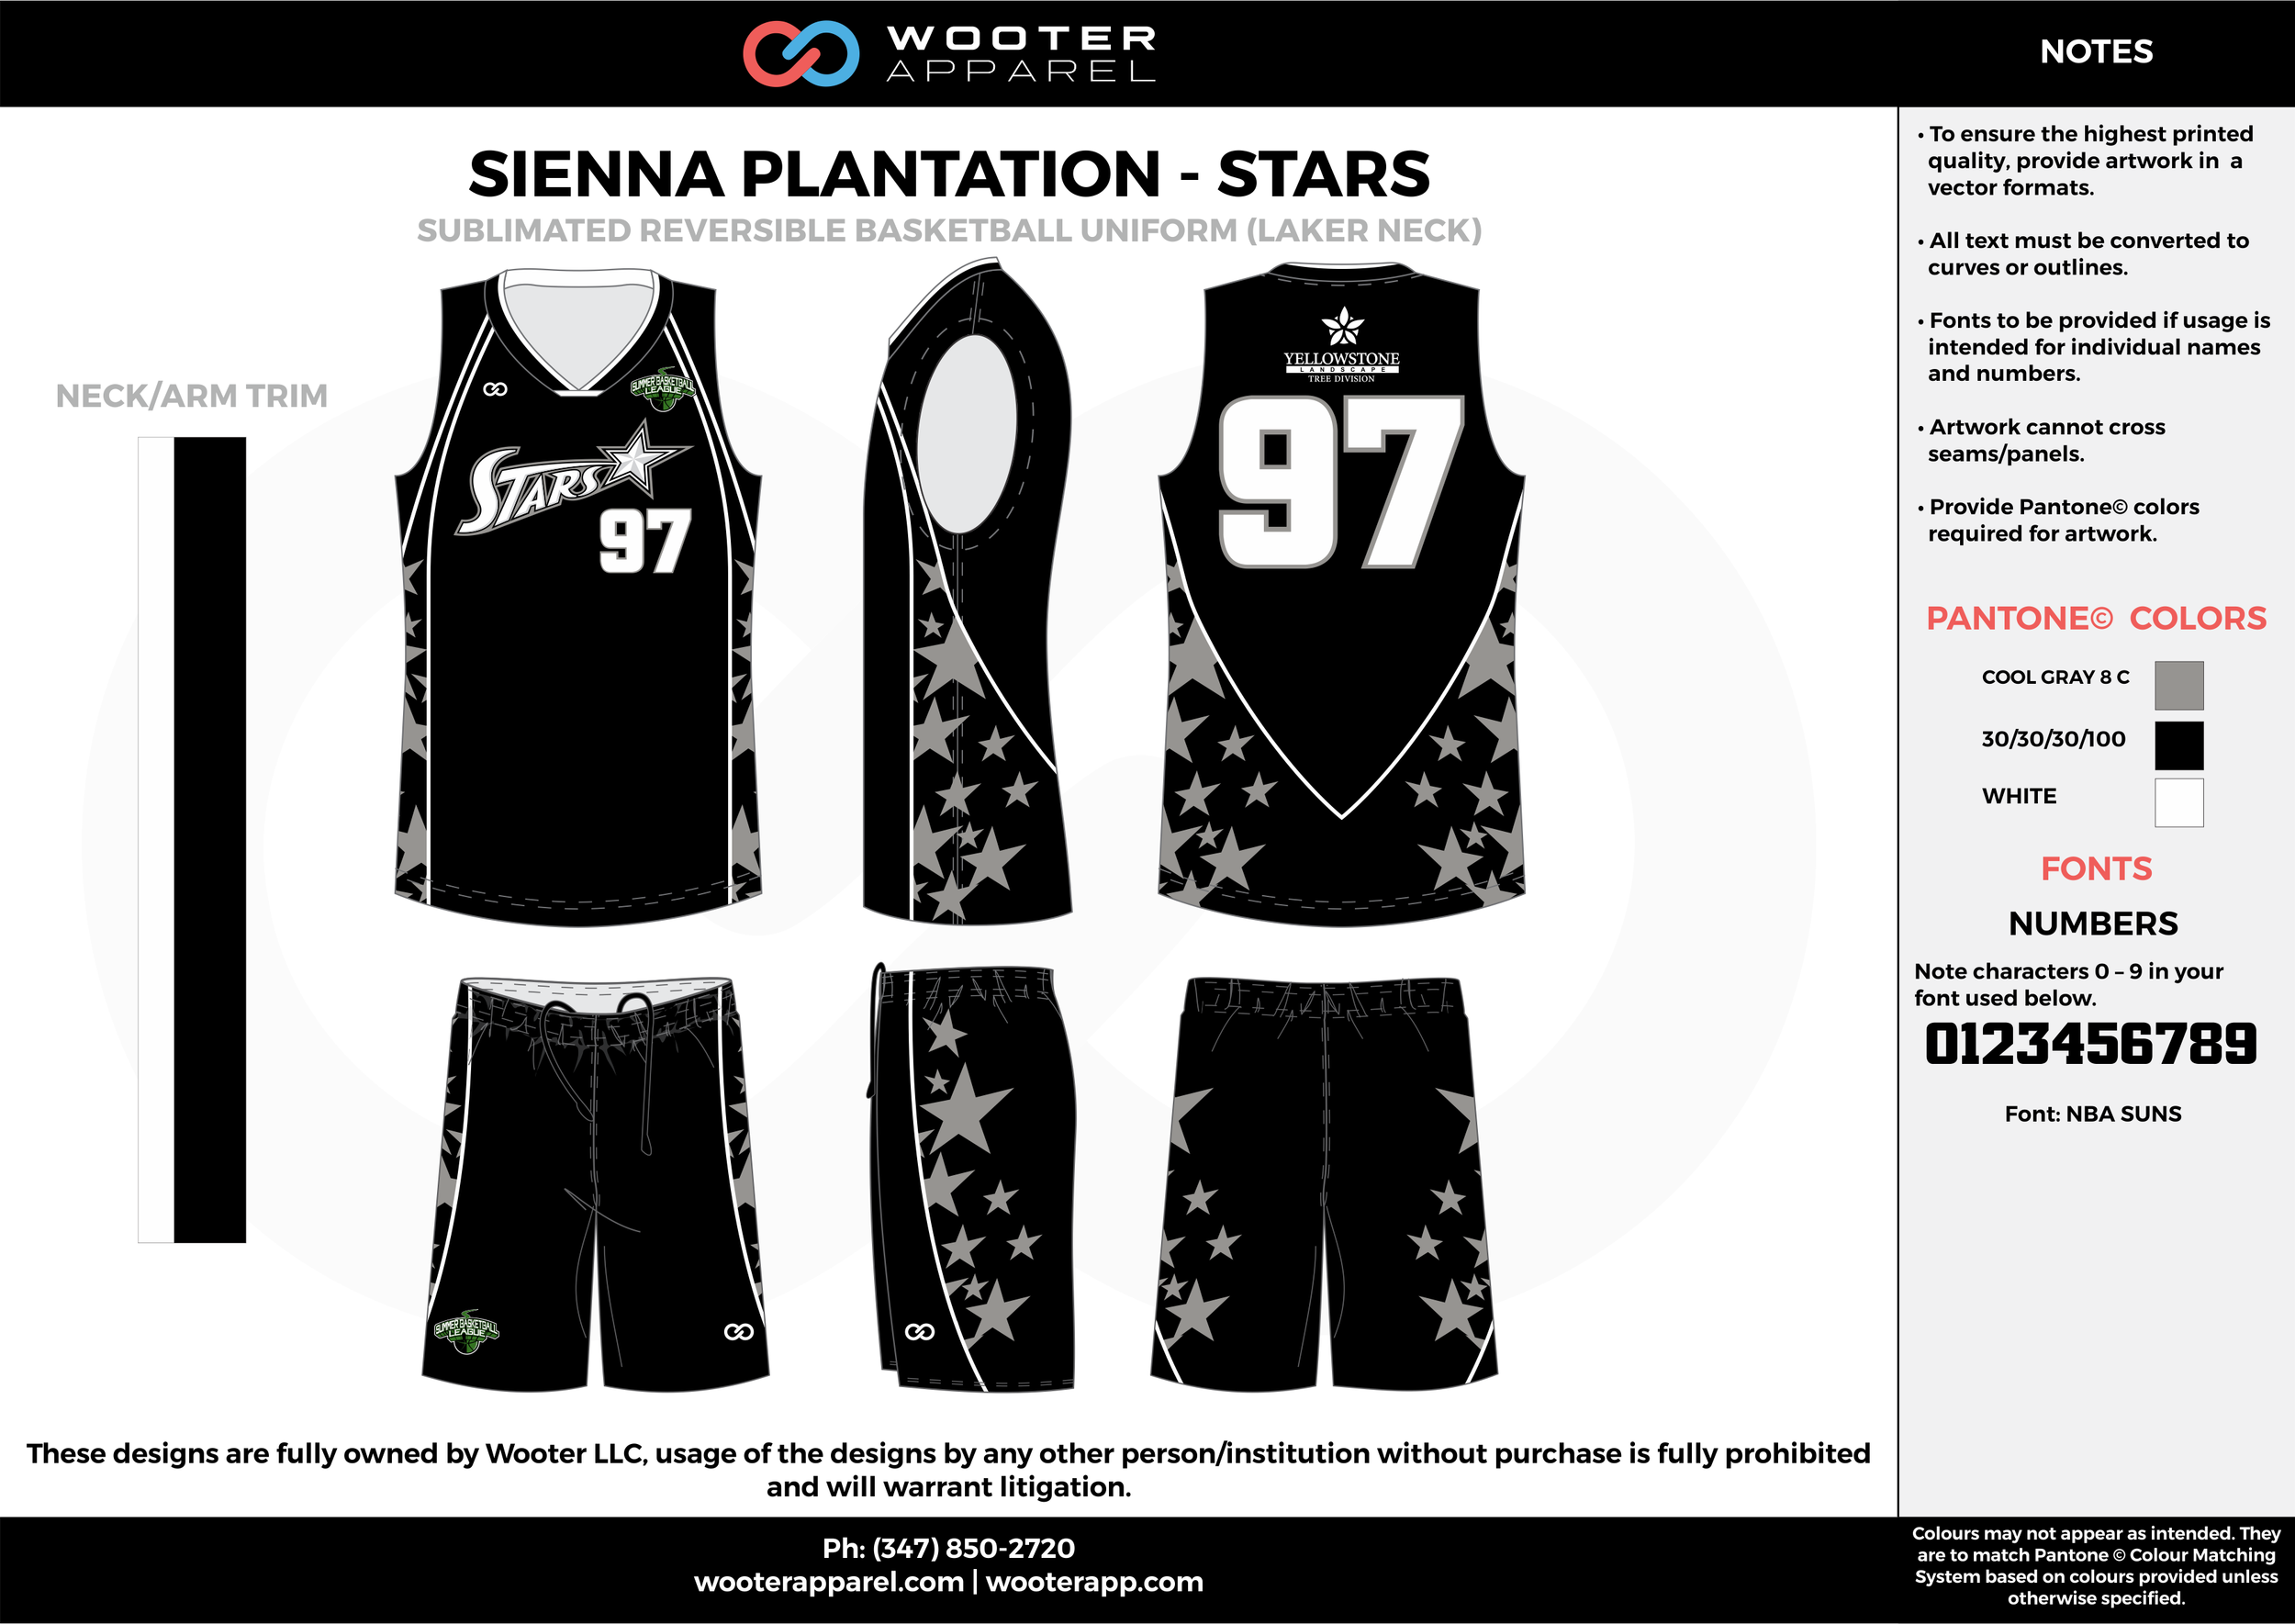 black and white nba jersey